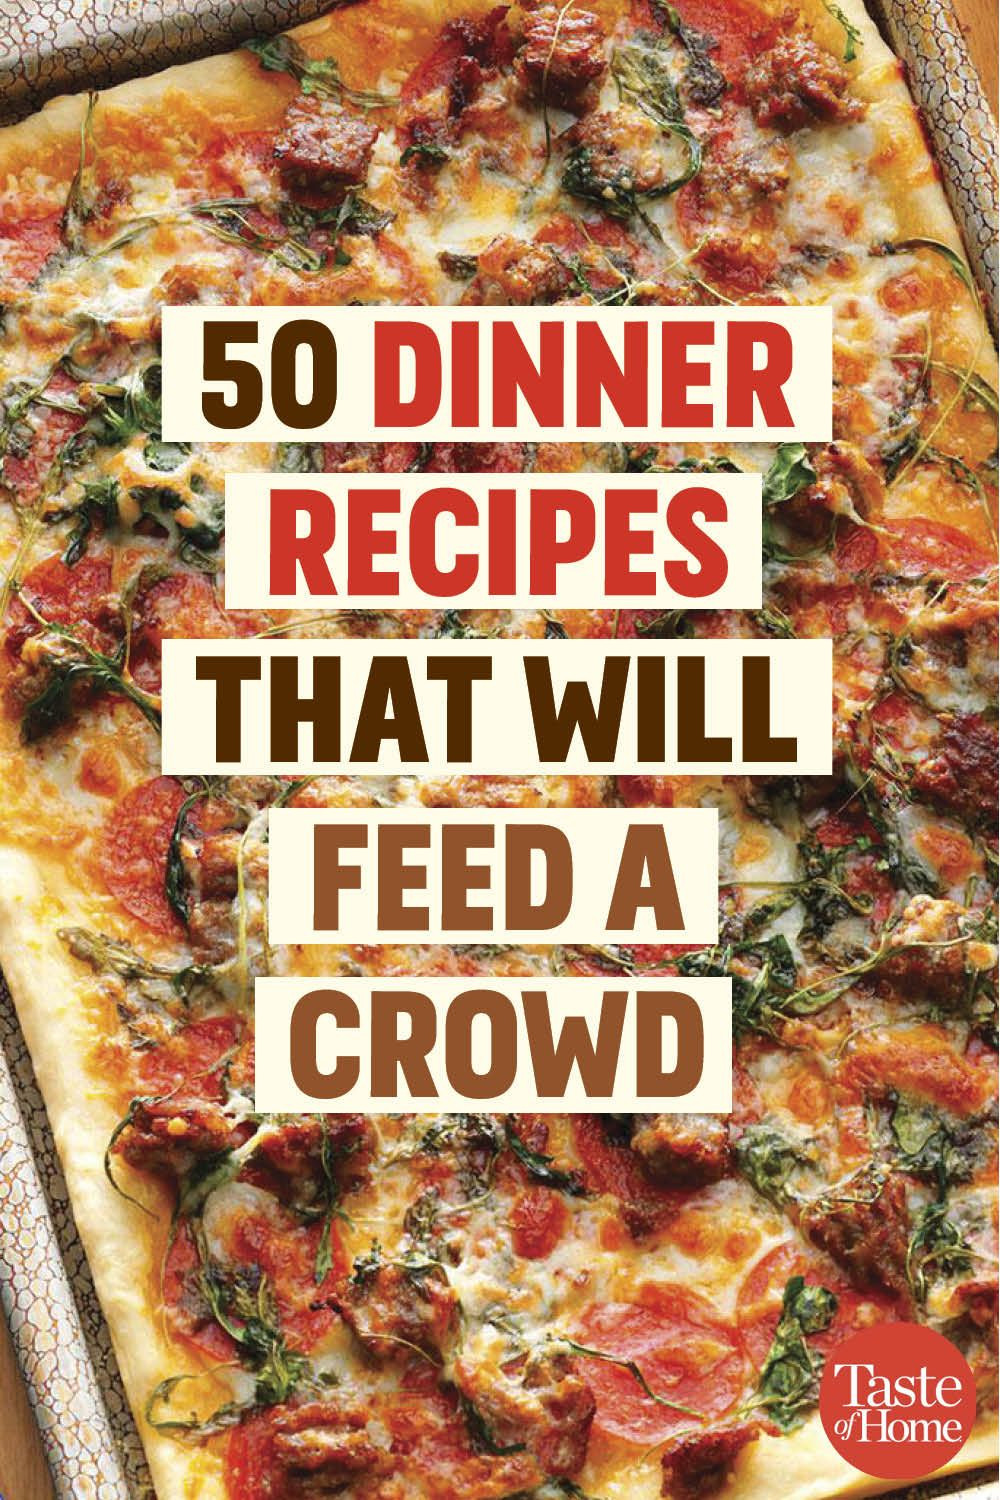 Dinner Ideas For Large Groups
 50 Dinner Recipes That Will Feed a Crowd